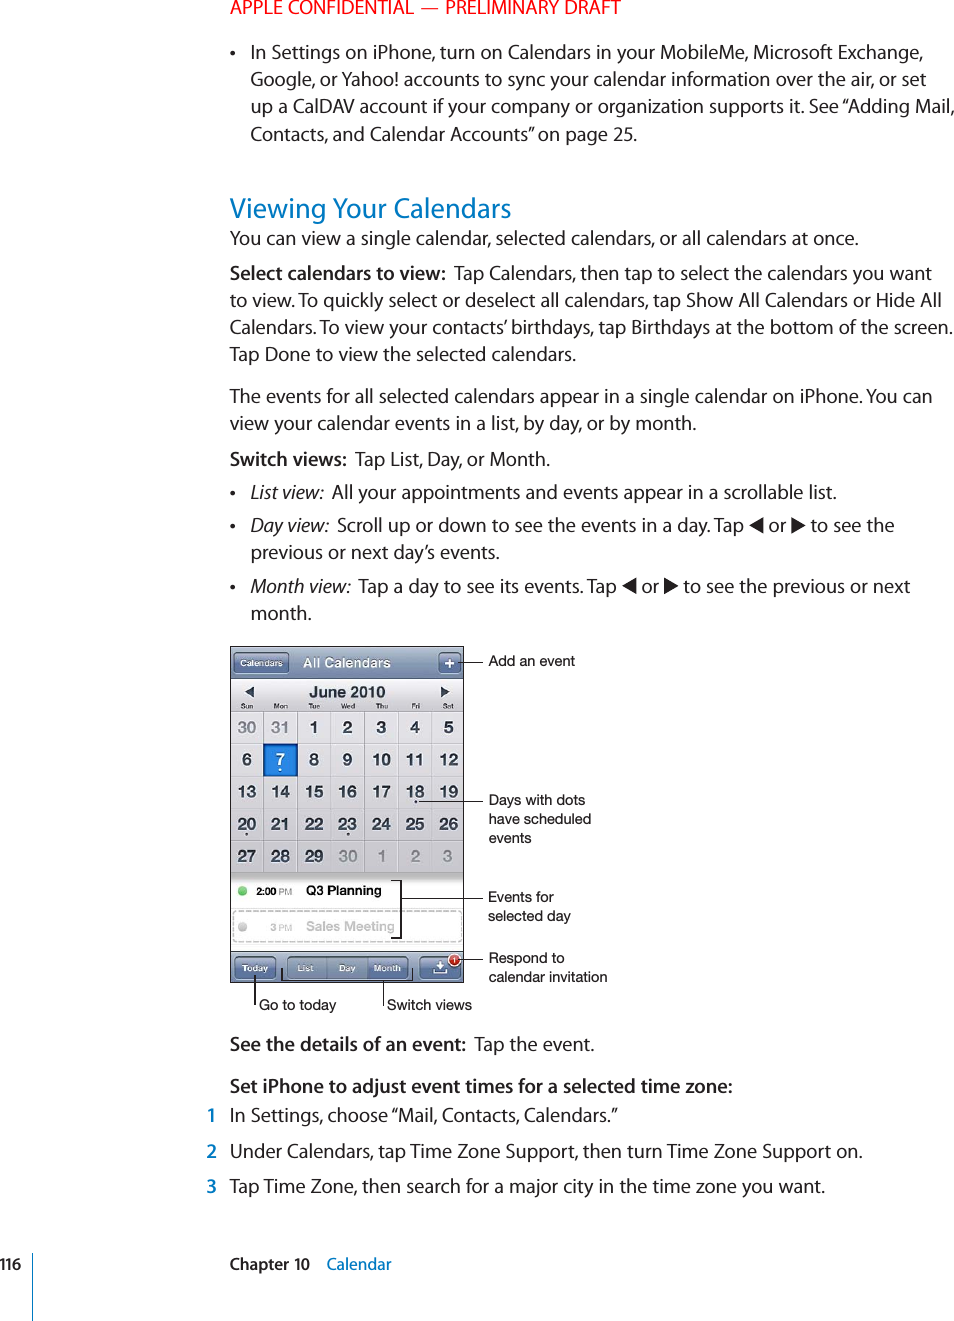 APPLE CONFIDENTIAL — PRELIMINARY DRAFTIn Settings on iPhone, turn on Calendars in your MobileMe, Microsoft Exchange,  Google, or Yahoo! accounts to sync your calendar information over the air, or set up a CalDAV account if your company or organization supports it. See “Adding Mail, Contacts, and Calendar Accounts” on page 25.Viewing Your CalendarsYou can view a single calendar, selected calendars, or all calendars at once.Select calendars to view:  Tap Calendars, then tap to select the calendars you want to view. To quickly select or deselect all calendars, tap Show All Calendars or Hide All Calendars. To view your contacts’ birthdays, tap Birthdays at the bottom of the screen. Tap Done to view the selected calendars.The events for all selected calendars appear in a single calendar on iPhone. You can view your calendar events in a list, by day, or by month. Switch views:  Tap List, Day, or Month. List view:  All your appointments and events appear in a scrollable list. Day view:  Scroll up or down to see the events in a day. Tap   or   to see the previous or next day’s events. Month view:  Tap a day to see its events. Tap   or   to see the previous or next month.&apos;.&apos;,1+/&quot;,!(,+!.+!-%.&apos;,+(,(,(1 /&quot;,!.&quot;/++)(&apos;,(%&apos;*&quot;&apos;.&quot;,,&quot;(&apos;.&apos;,+(*+%,1See the details of an event:  Tap the event.Set iPhone to adjust event times for a selected time zone:   1  In Settings, choose “Mail, Contacts, Calendars.” 2  Under Calendars, tap Time Zone Support, then turn Time Zone Support on. 3  Tap Time Zone, then search for a major city in the time zone you want.116 Chapter 10    Calendar